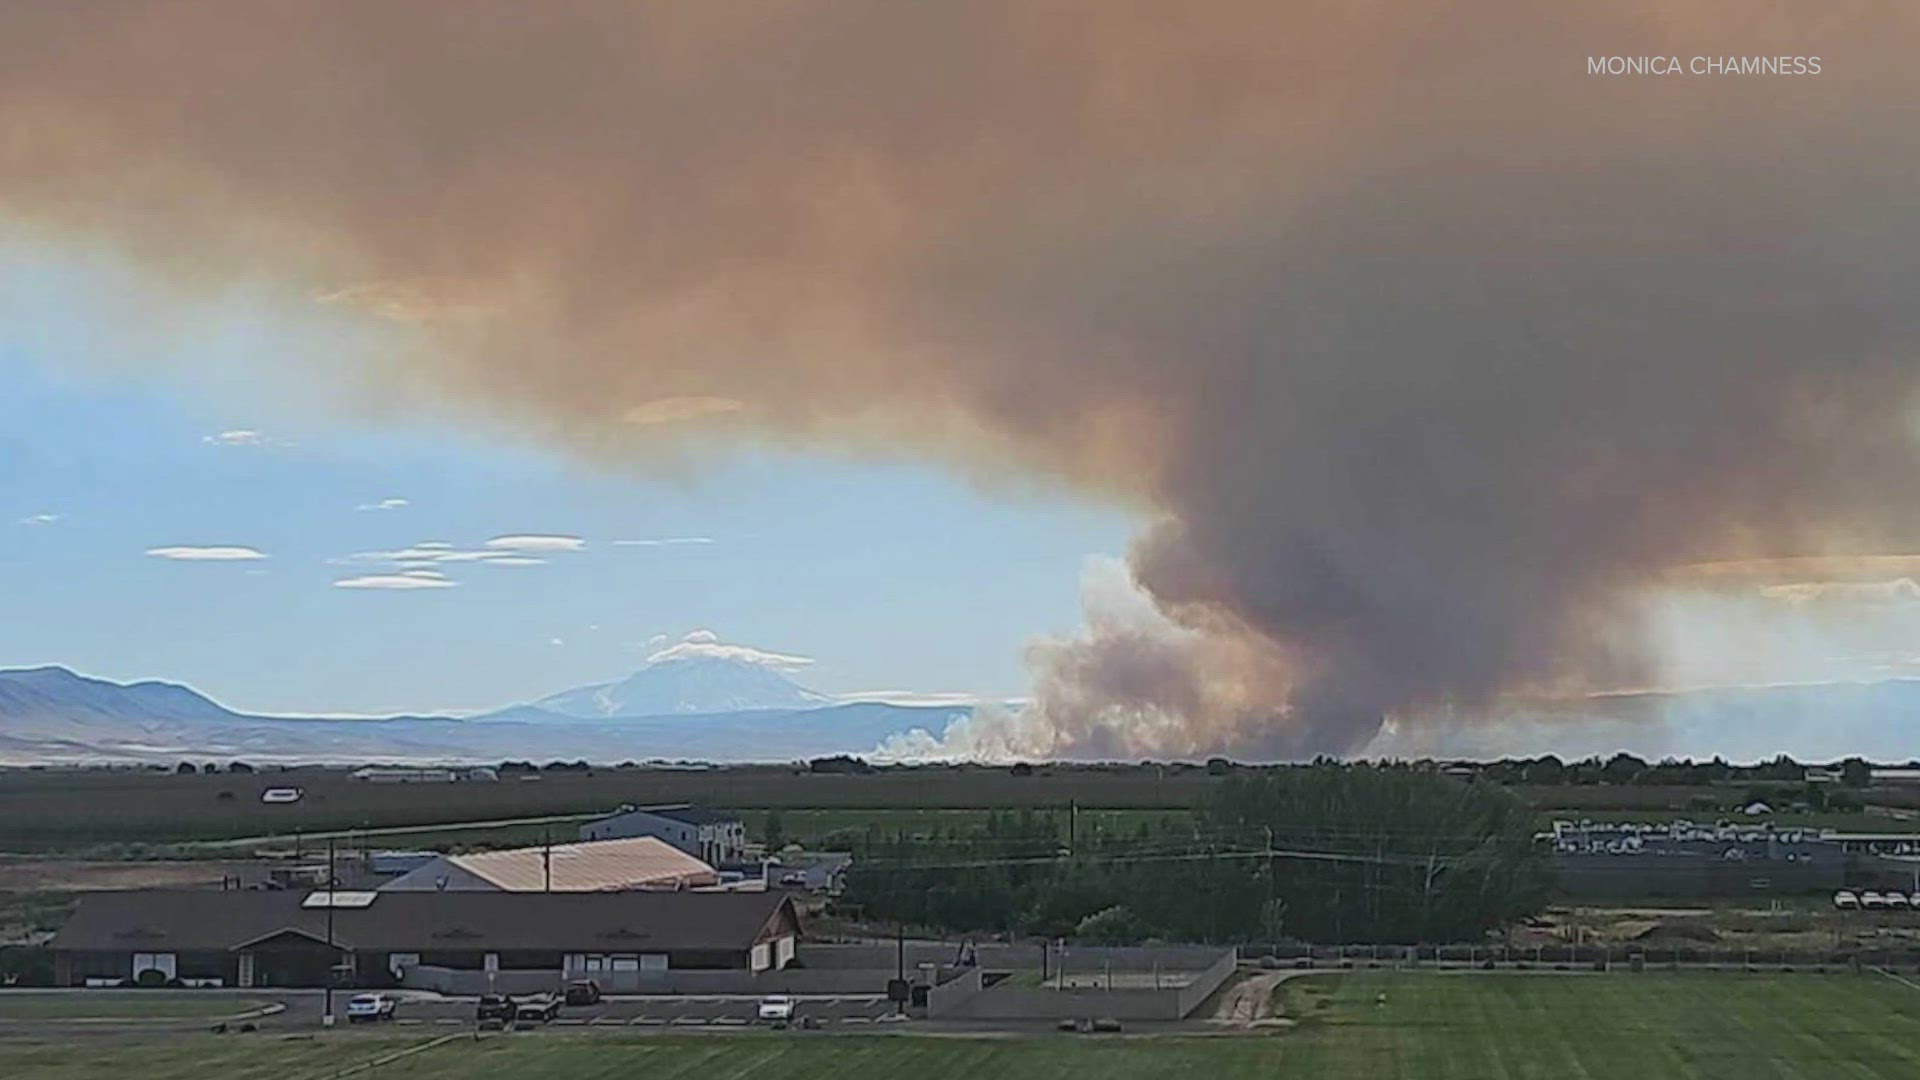 Yakima fire officials estimate over a dozen structures, many of which were homes, were lost in a wildfire burning near White Swan in central Washington.